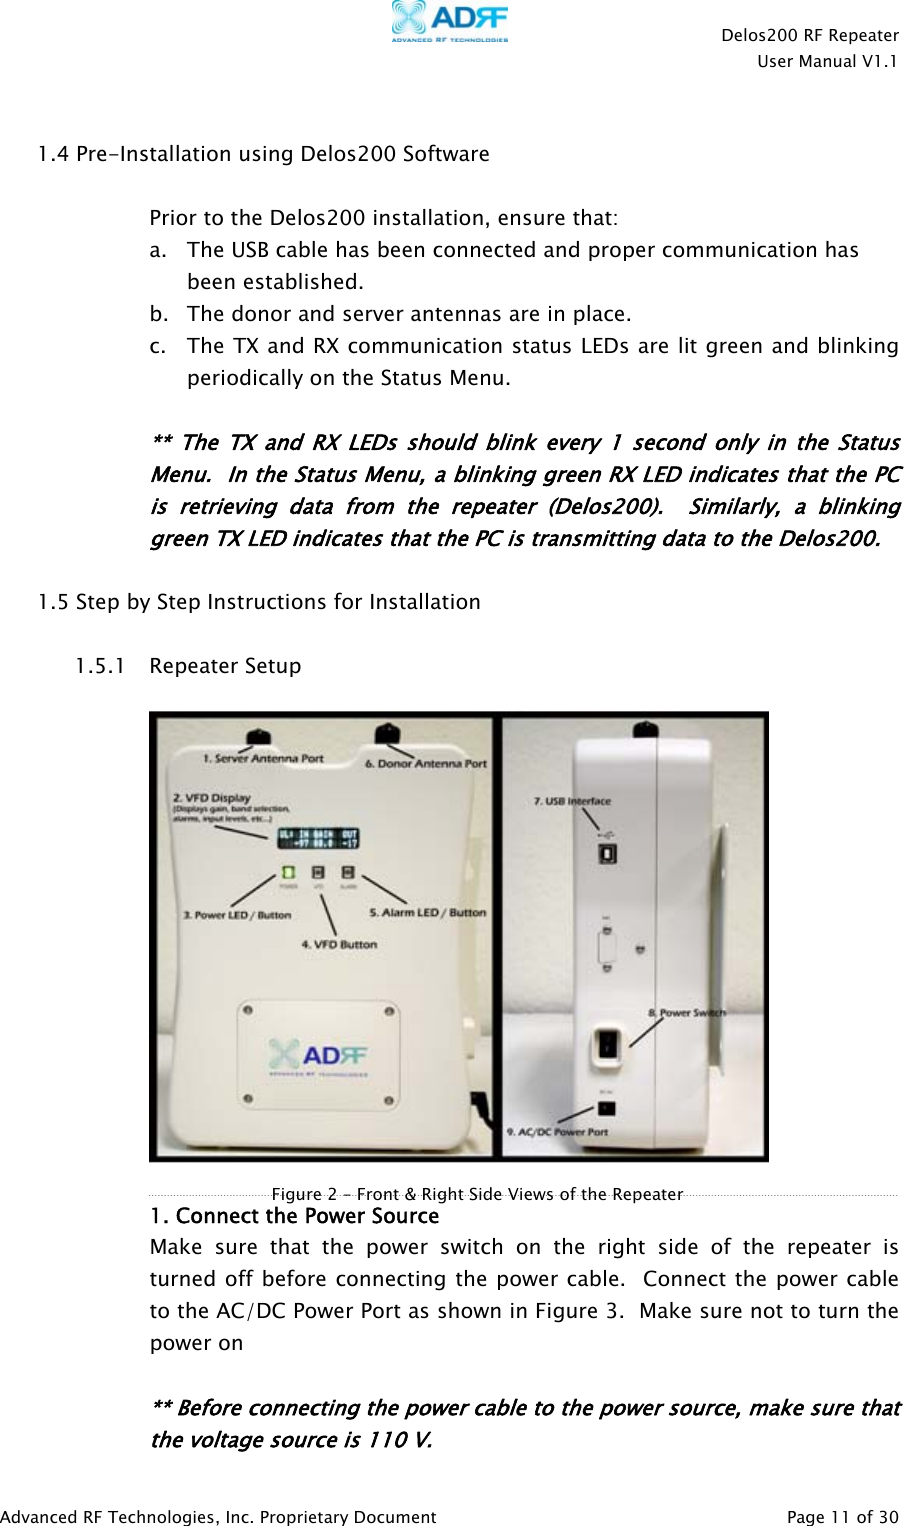    Delos200 RF Repeater  User Manual V1.1  Advanced RF Technologies, Inc. Proprietary Document   Page 11 of 30   1.4 Pre-Installation using Delos200 Software   Prior to the Delos200 installation, ensure that: a. The USB cable has been connected and proper communication has been established. b. The donor and server antennas are in place. c. The TX and RX communication status LEDs are lit green and blinking periodically on the Status Menu.   ** The TX and RX LEDs should blink every 1 second only in the Status Menu.  In the Status Menu, a blinking green RX LED indicates that the PC is retrieving data from the repeater (Delos200).  Similarly, a blinking green TX LED indicates that the PC is transmitting data to the Delos200.   1.5 Step by Step Instructions for Installation  1.5.1 Repeater Setup     1. Connect the Power Source  Make sure that the power switch on the right side of the repeater is turned off before connecting the power cable.  Connect the power cable to the AC/DC Power Port as shown in Figure 3.  Make sure not to turn the power on      ** Before connecting the power cable to the power source, make sure that the voltage source is 110 V. Figure 2 – Front &amp; Right Side Views of the Repeater 